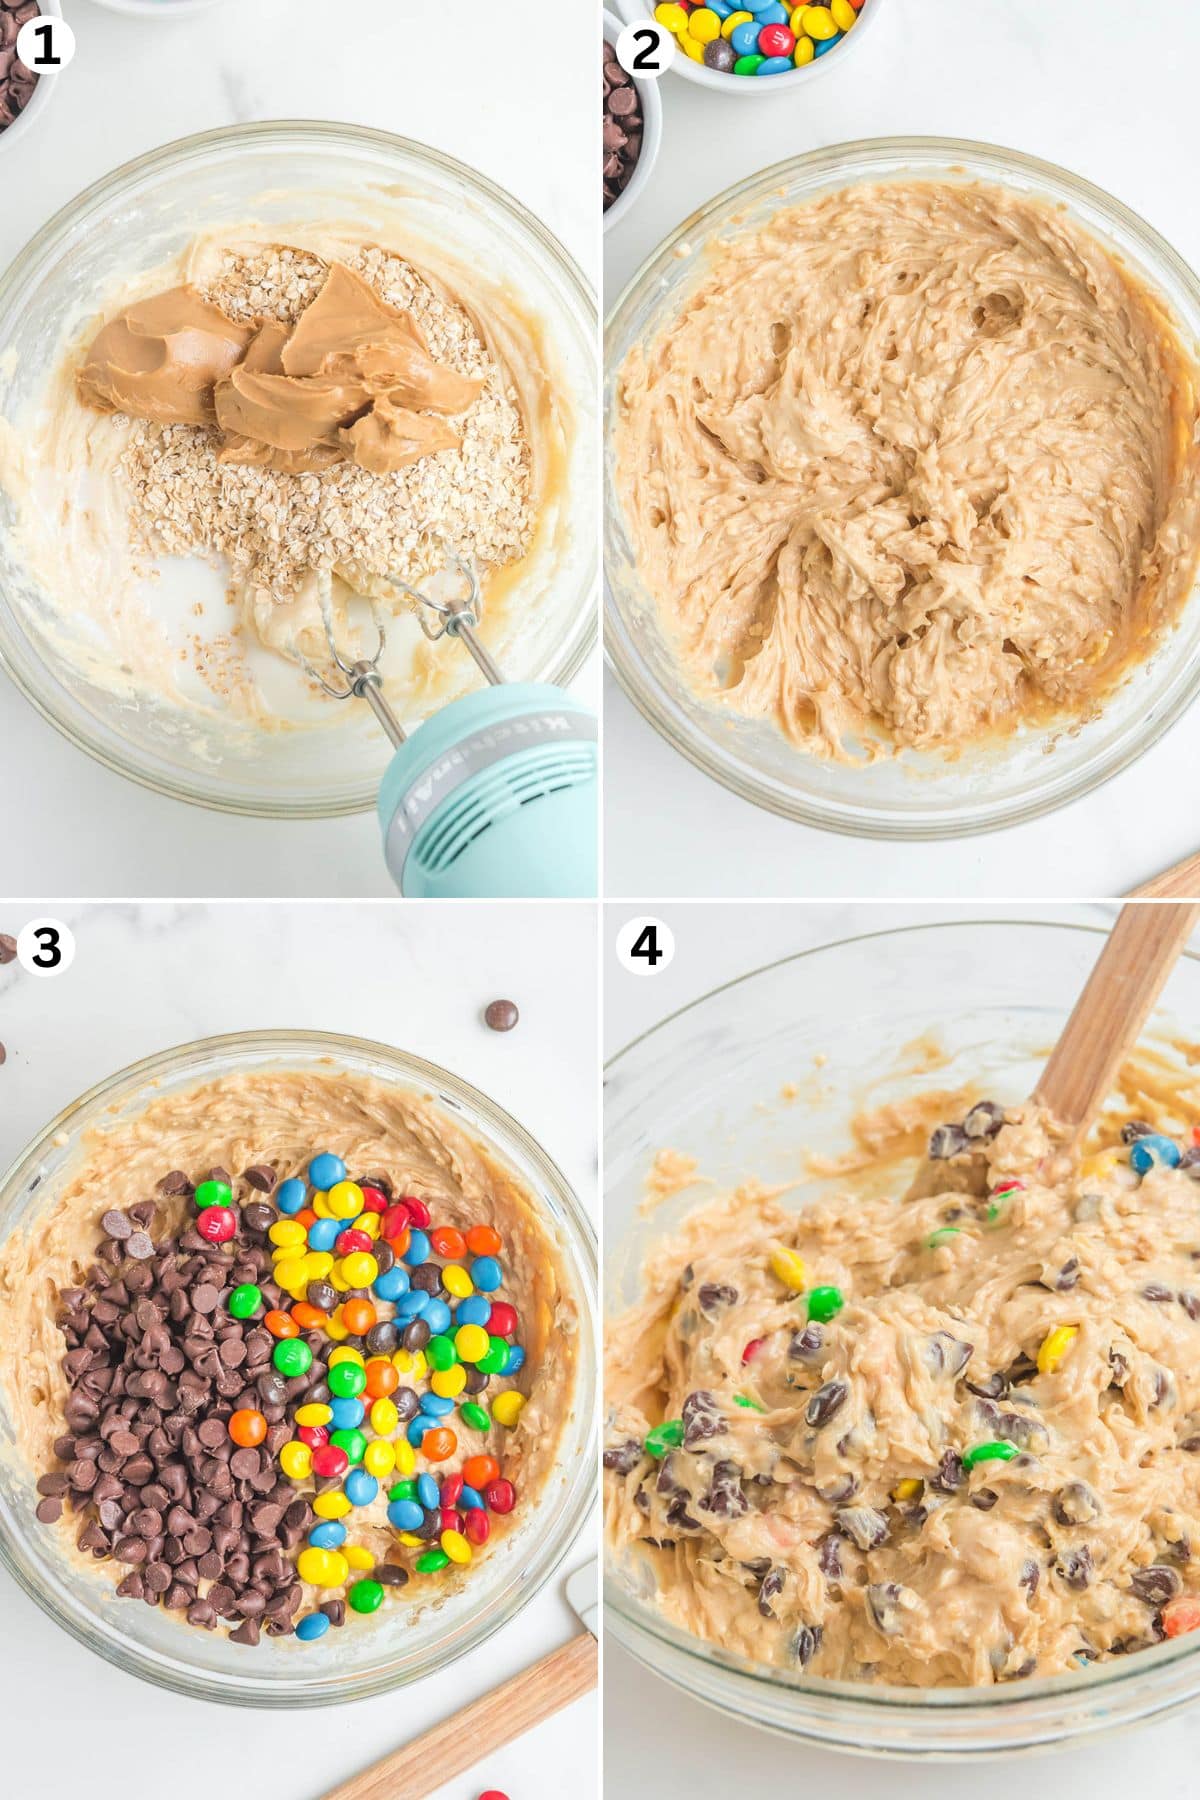 use mixer to mix all ingredients. all ingredients mixed in a bowl. add chocolate chips and M&M's into the bowl. use spatula to mix it evenly.